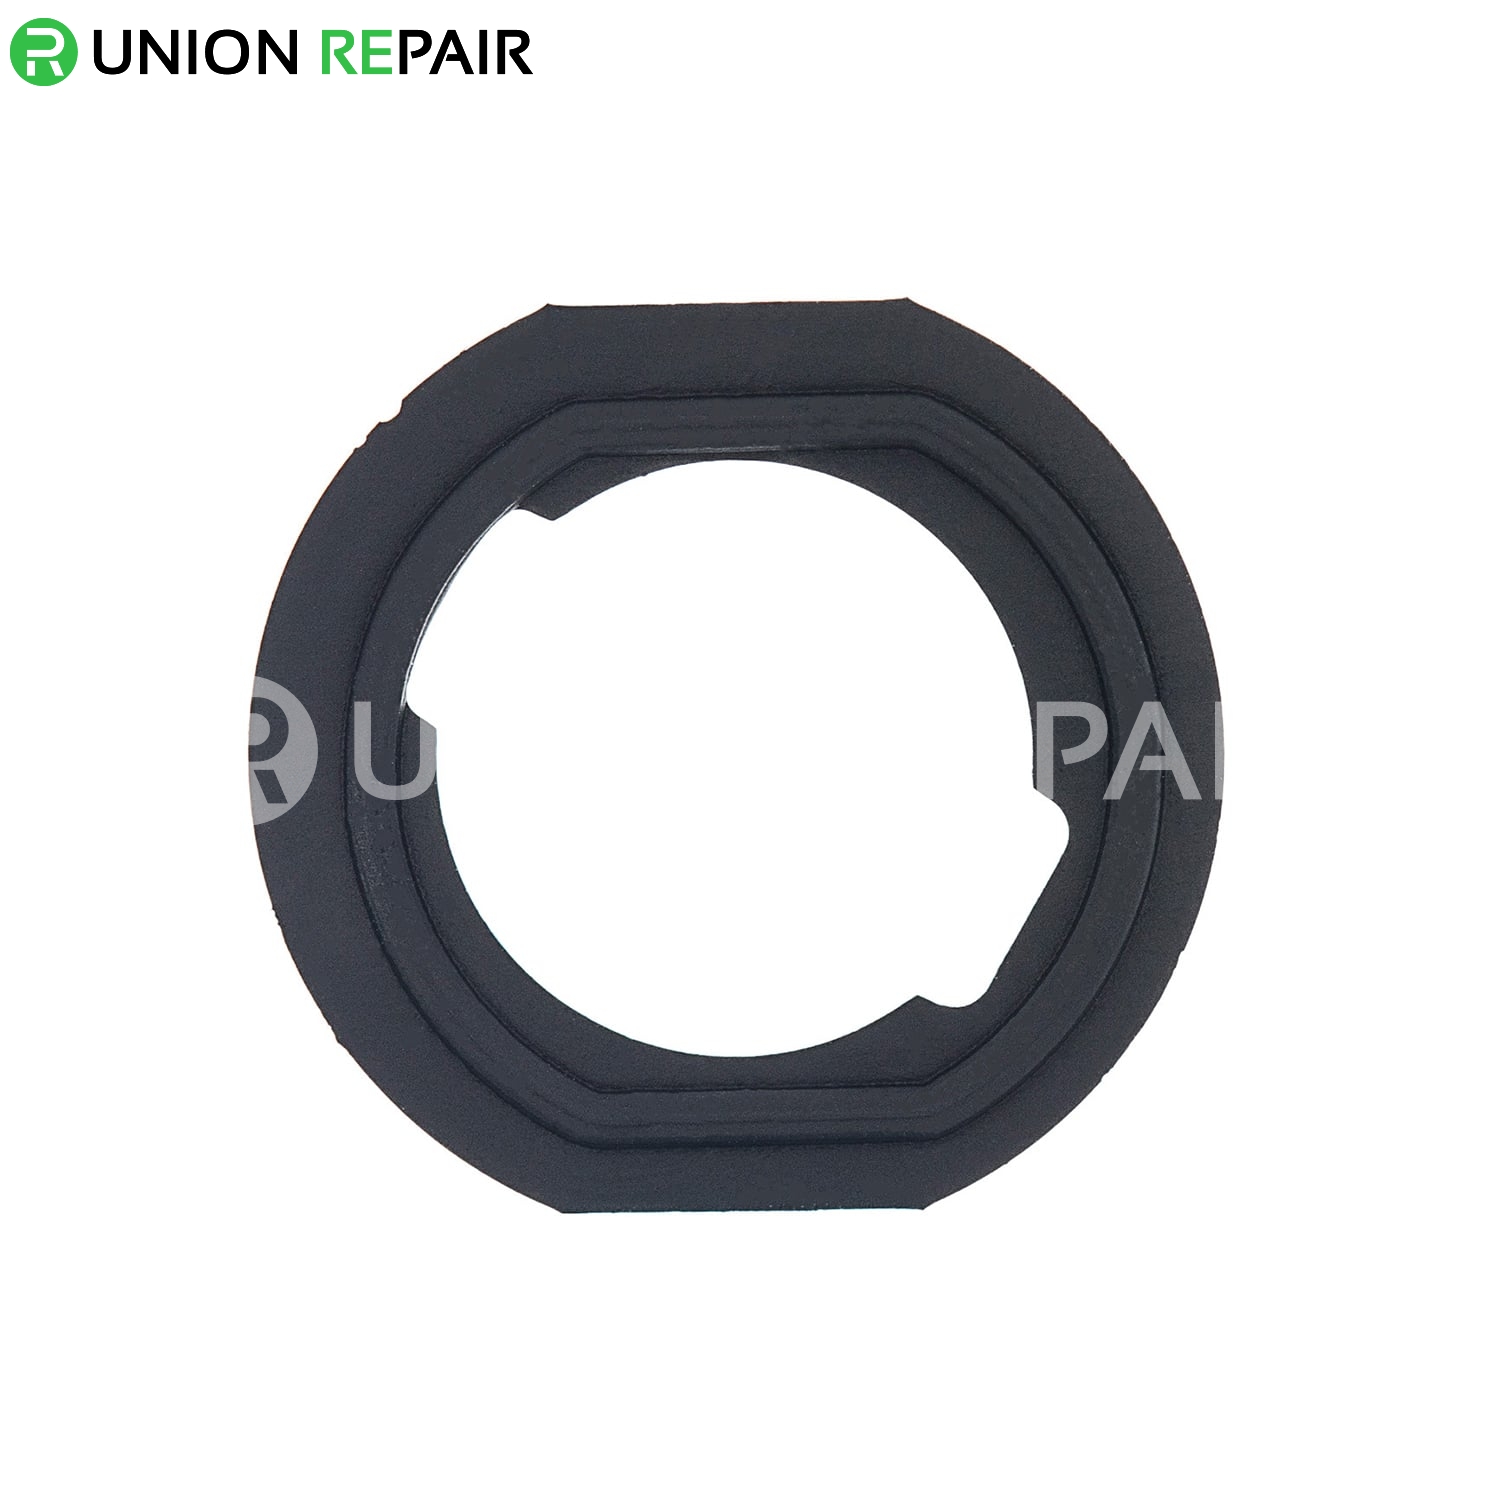 Replacement for iPad 6/7/8/9 Home Button Rubber Gasket